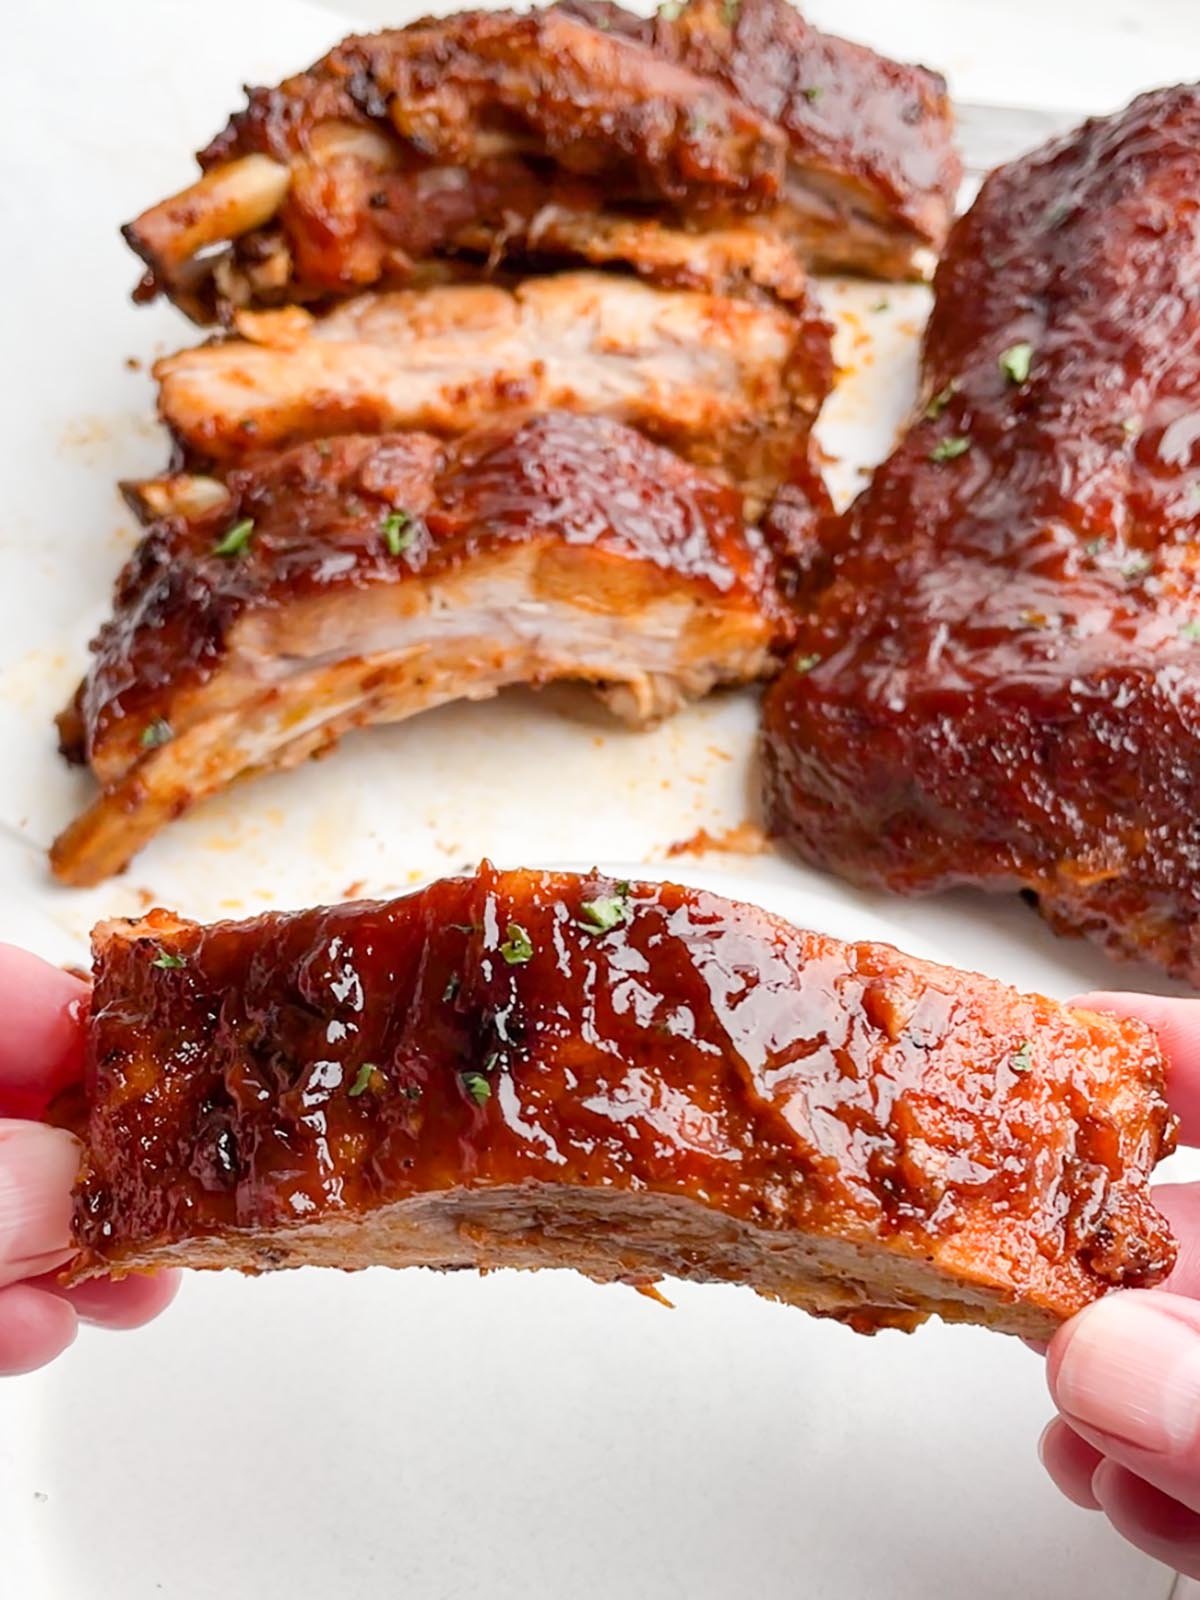 hands holding one rib in foreground with racks of ribs in the background